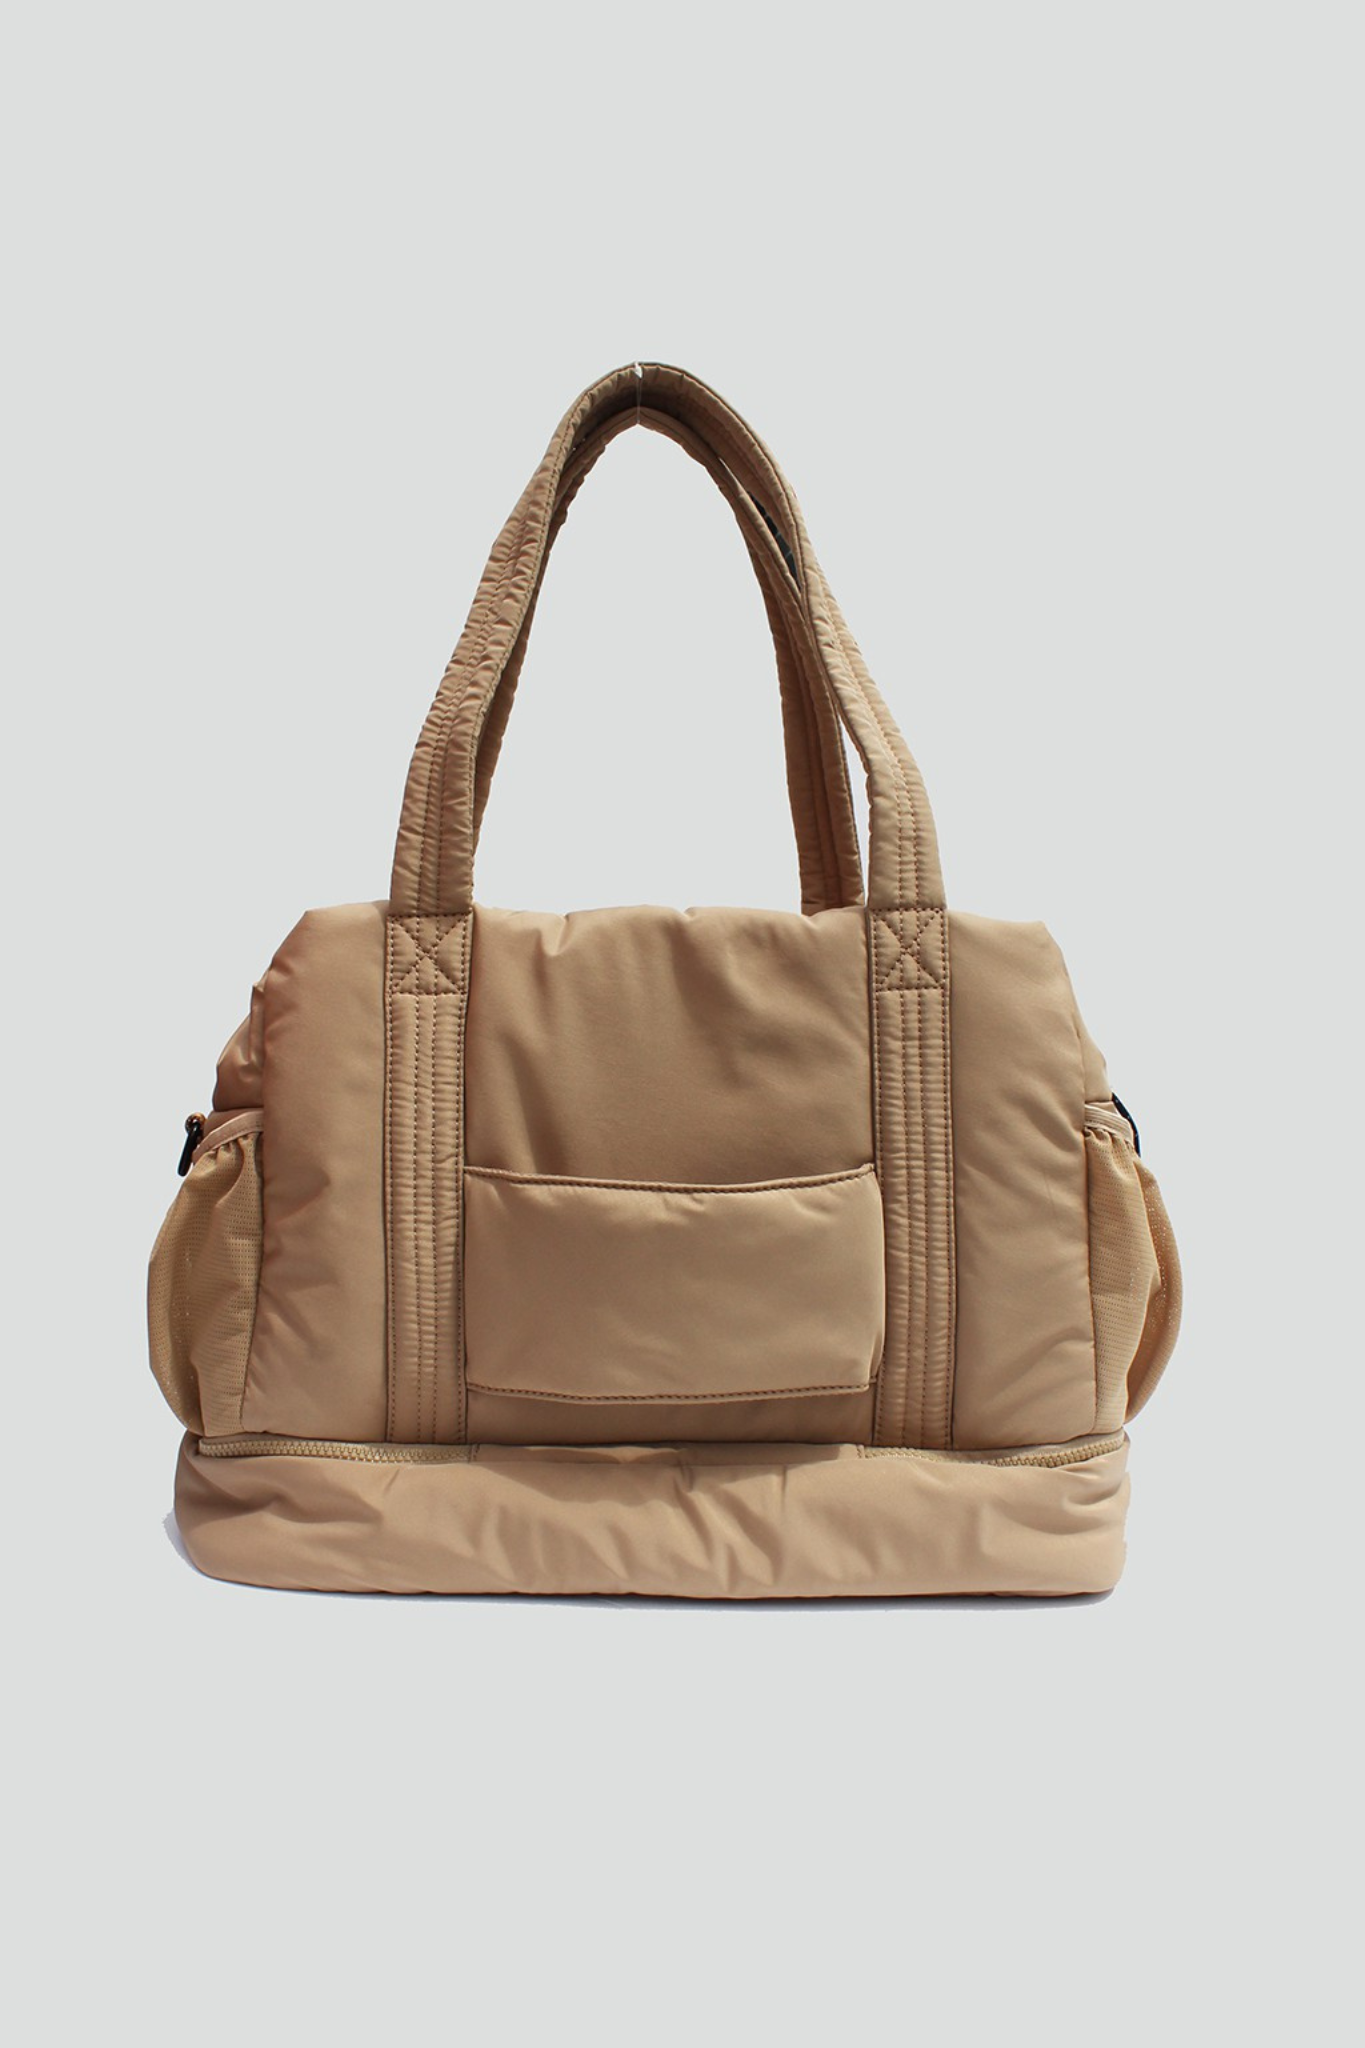 View 2 of Brooke Puffy Overnight Bag in Sand, a Bags from Larrea Cove. Detail: .